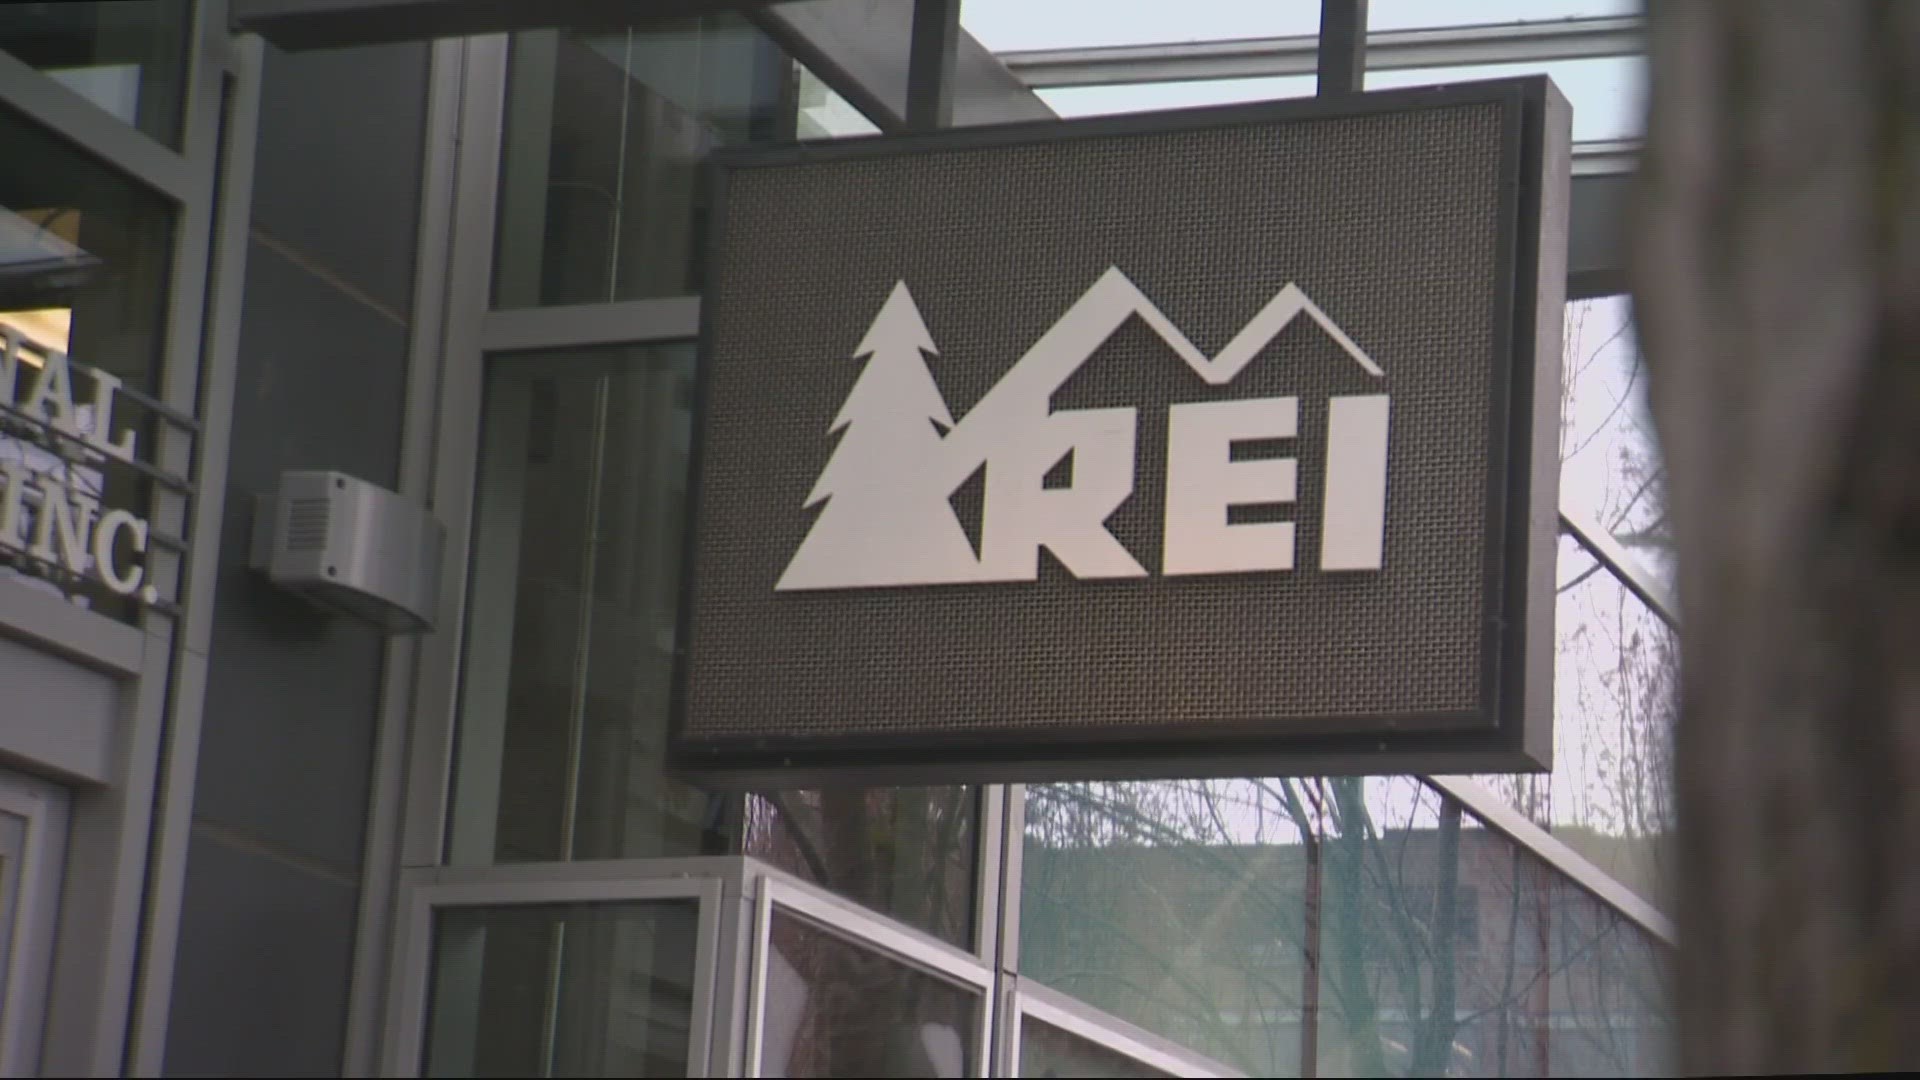 In a letter to members, REI said its Pearl District location saw its highest number of break-ins and thefts in two decades last year, despite adding security.